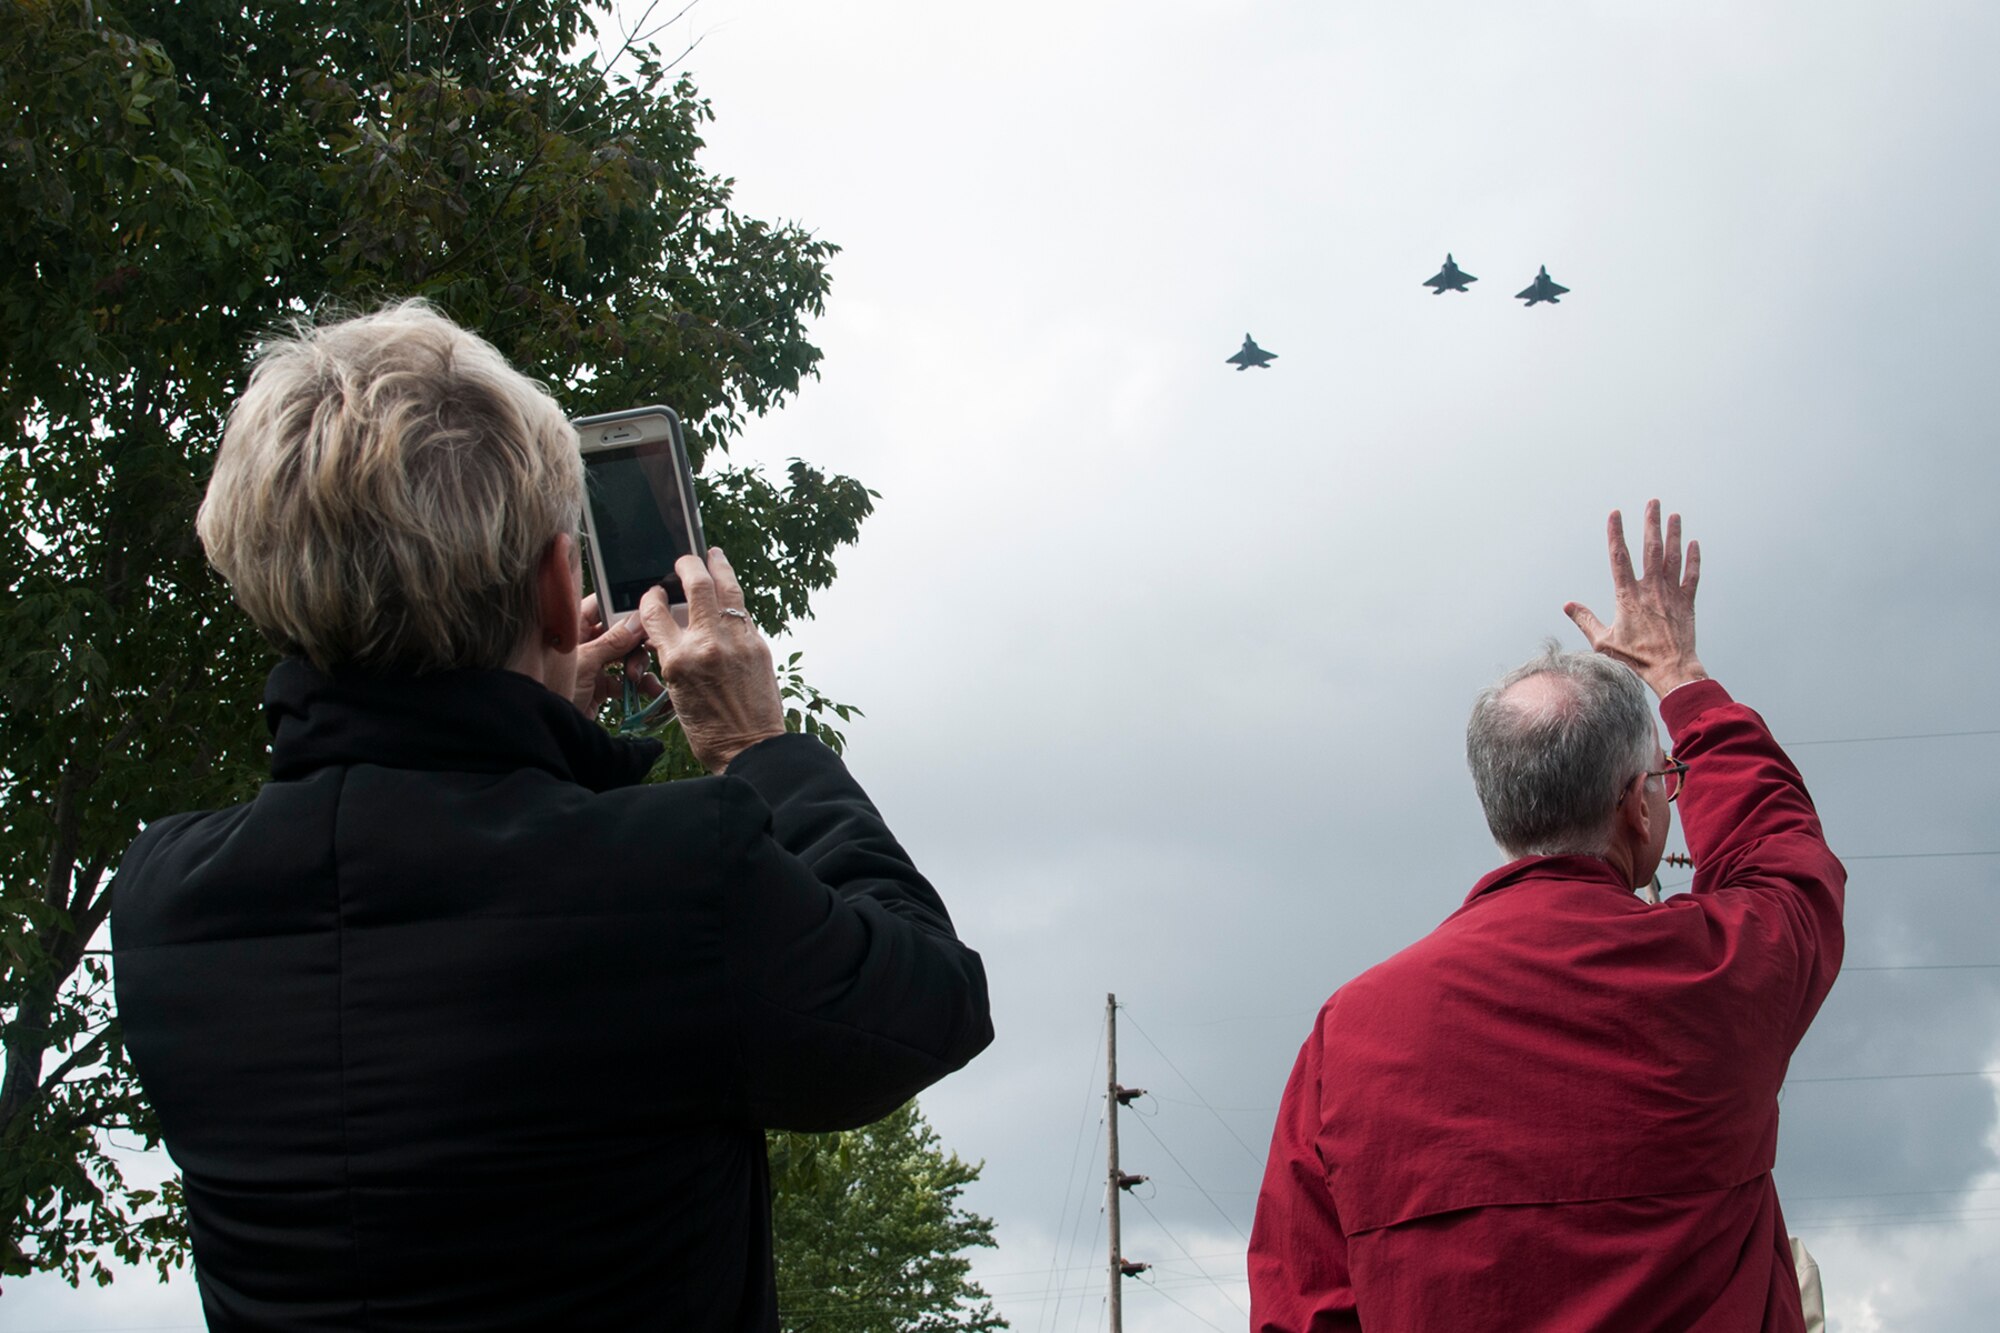 F-22 Raptors from the 27th Fighter Squadron perform a flyover in during a ceremony to honor a World War II veteran Tipton, Ind. Sept. 29, 2016. The ceremony was to honor Lt. Robert McIntosh, 27th Fighter Squadron pilot, whose remains were recently recovered. (U.S. Air Force photo/Staff Sgt. Dakota Bergl)